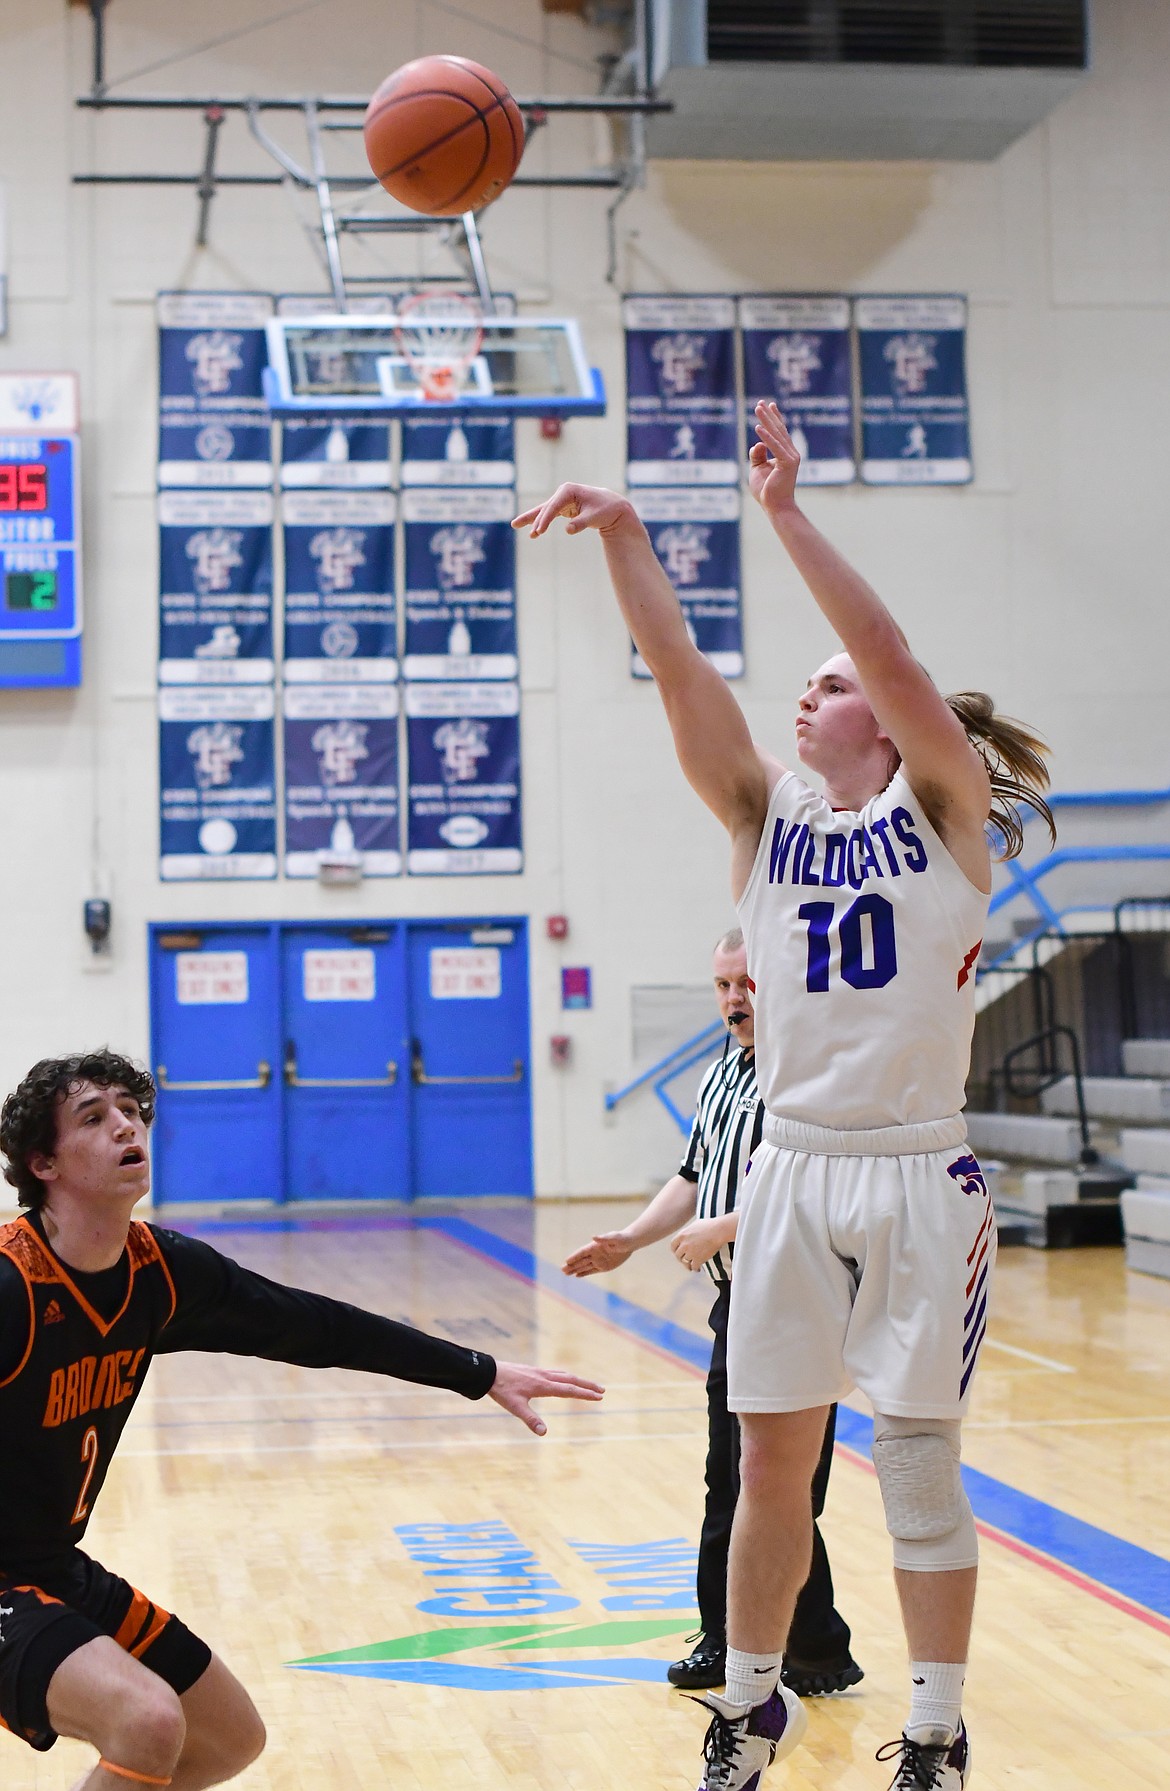 Cade Morgan with an open shot against Frenchtown Tuesday evening. (Teresa Byrd/Hungry Horse News)